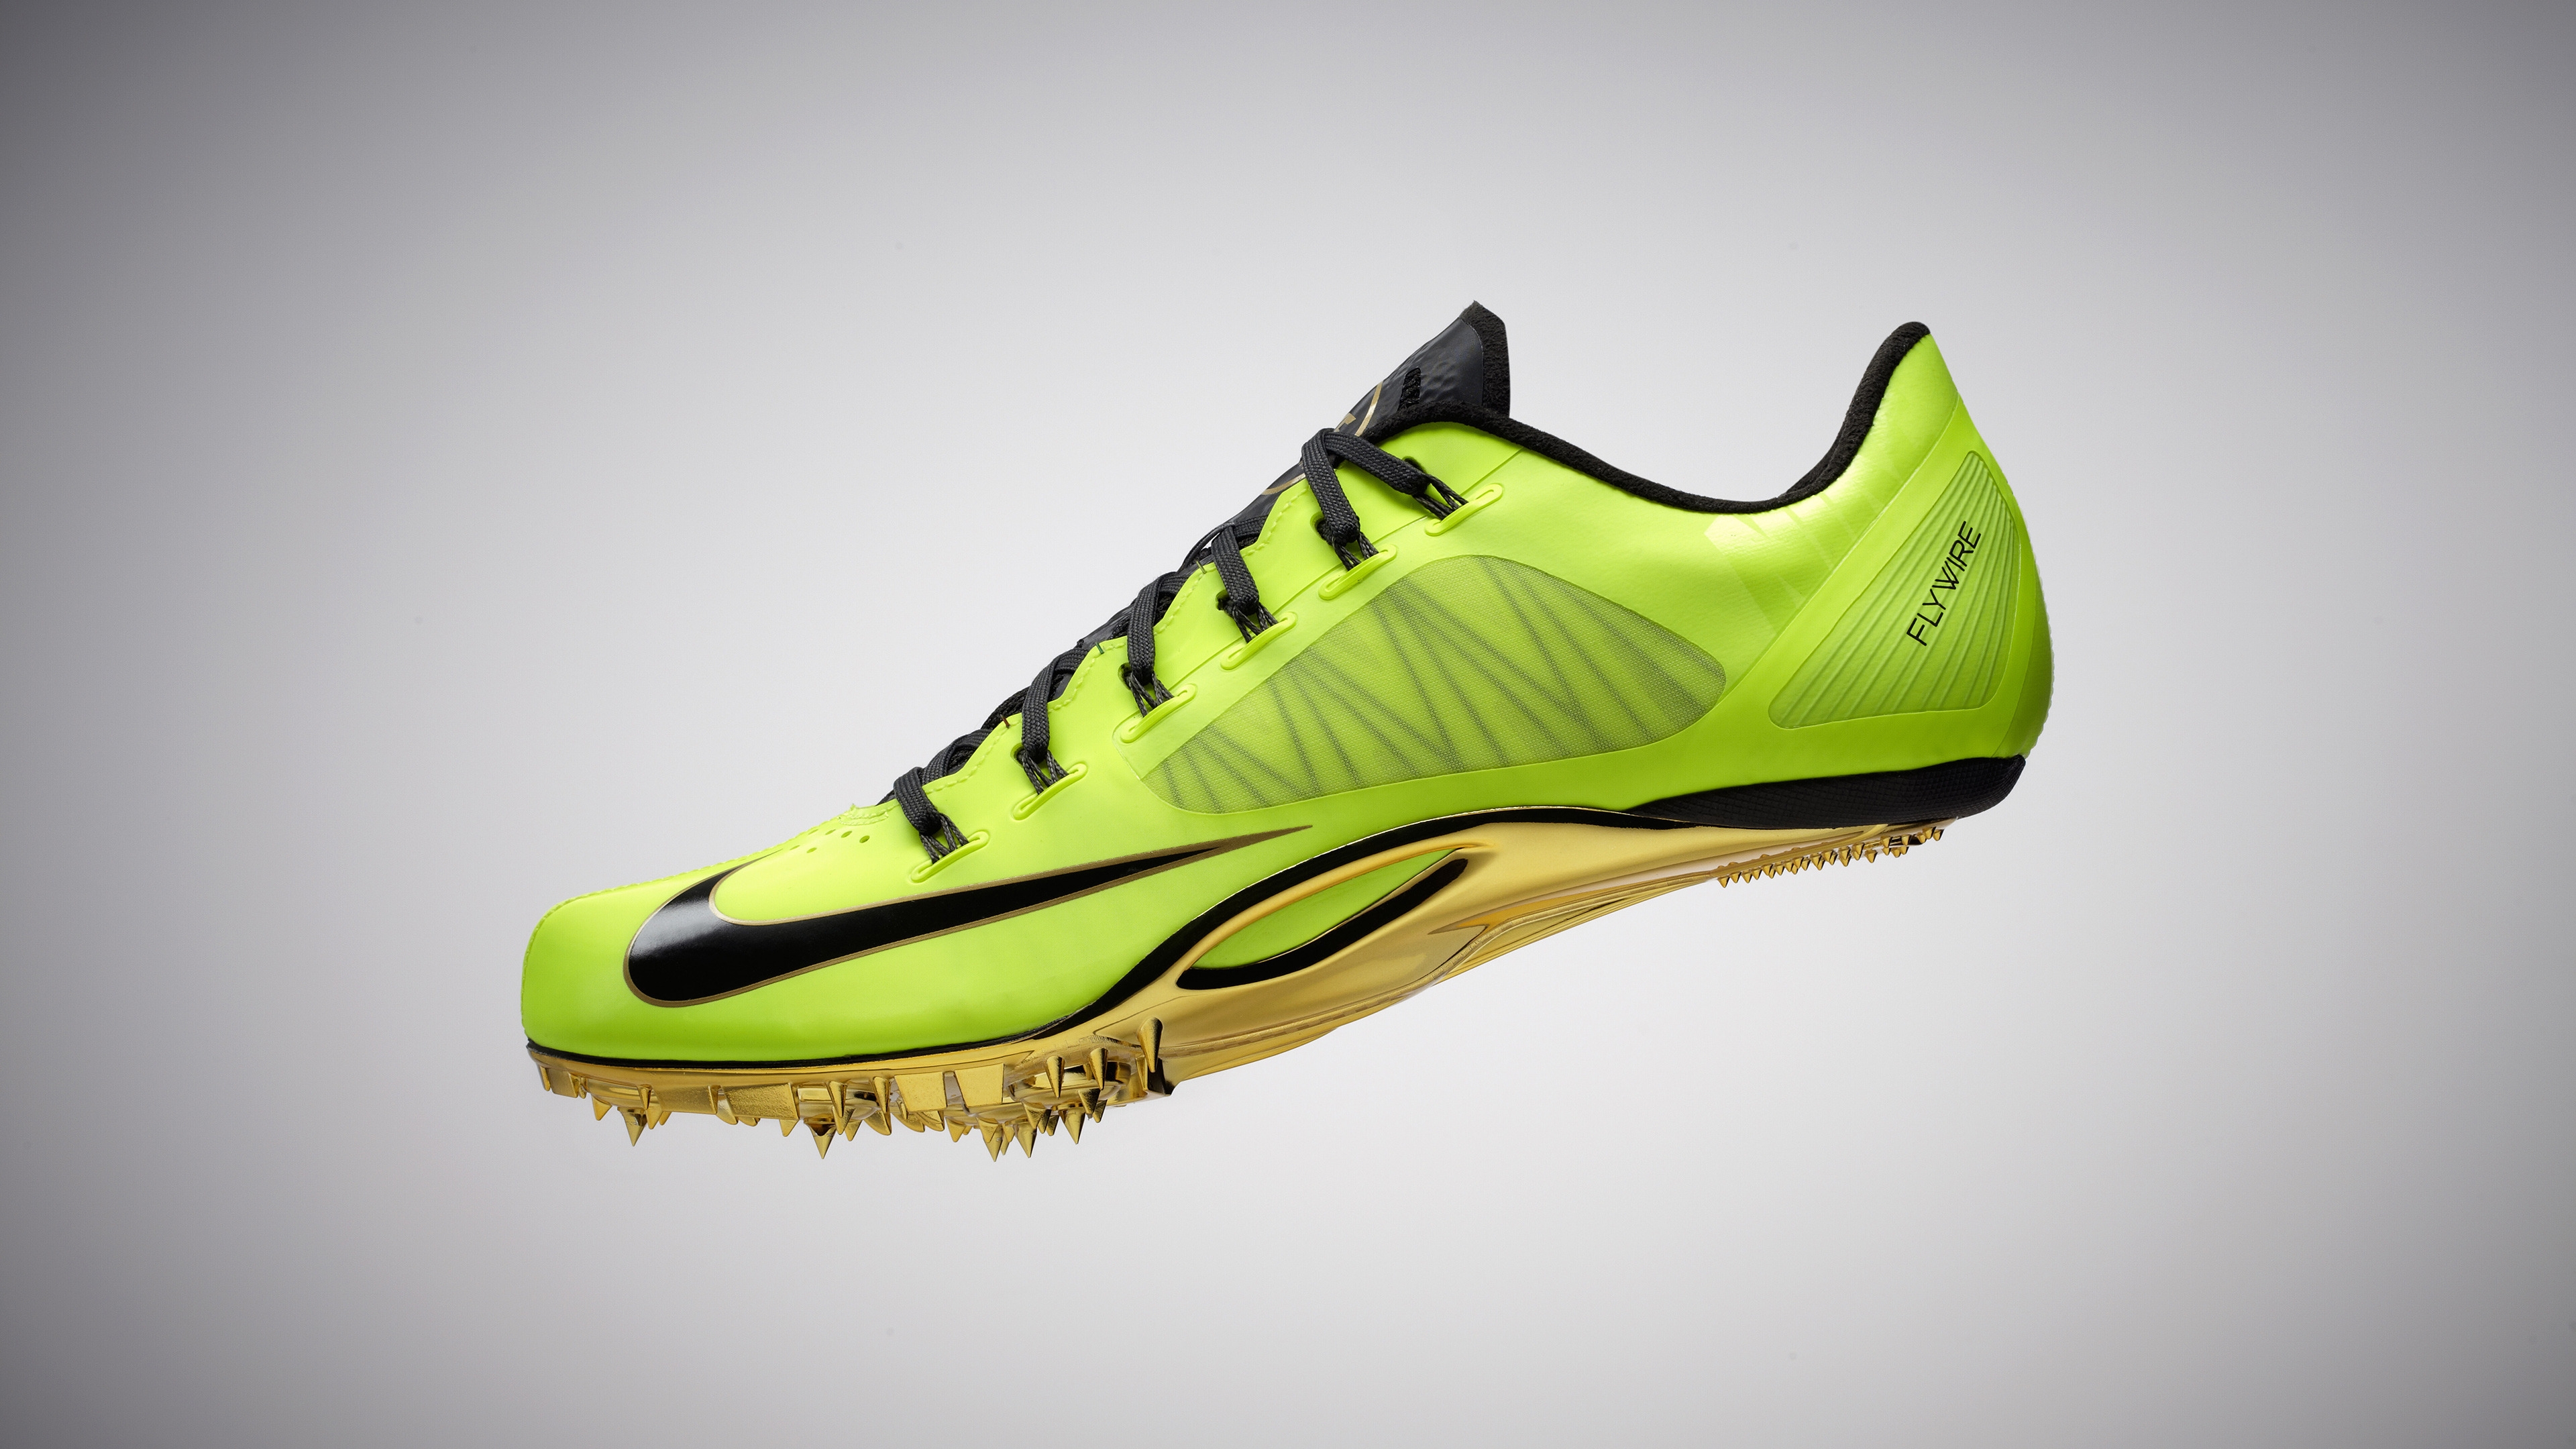 Nike Zoom Superfly R4 for 3840 x 2160 Ultra HD resolution